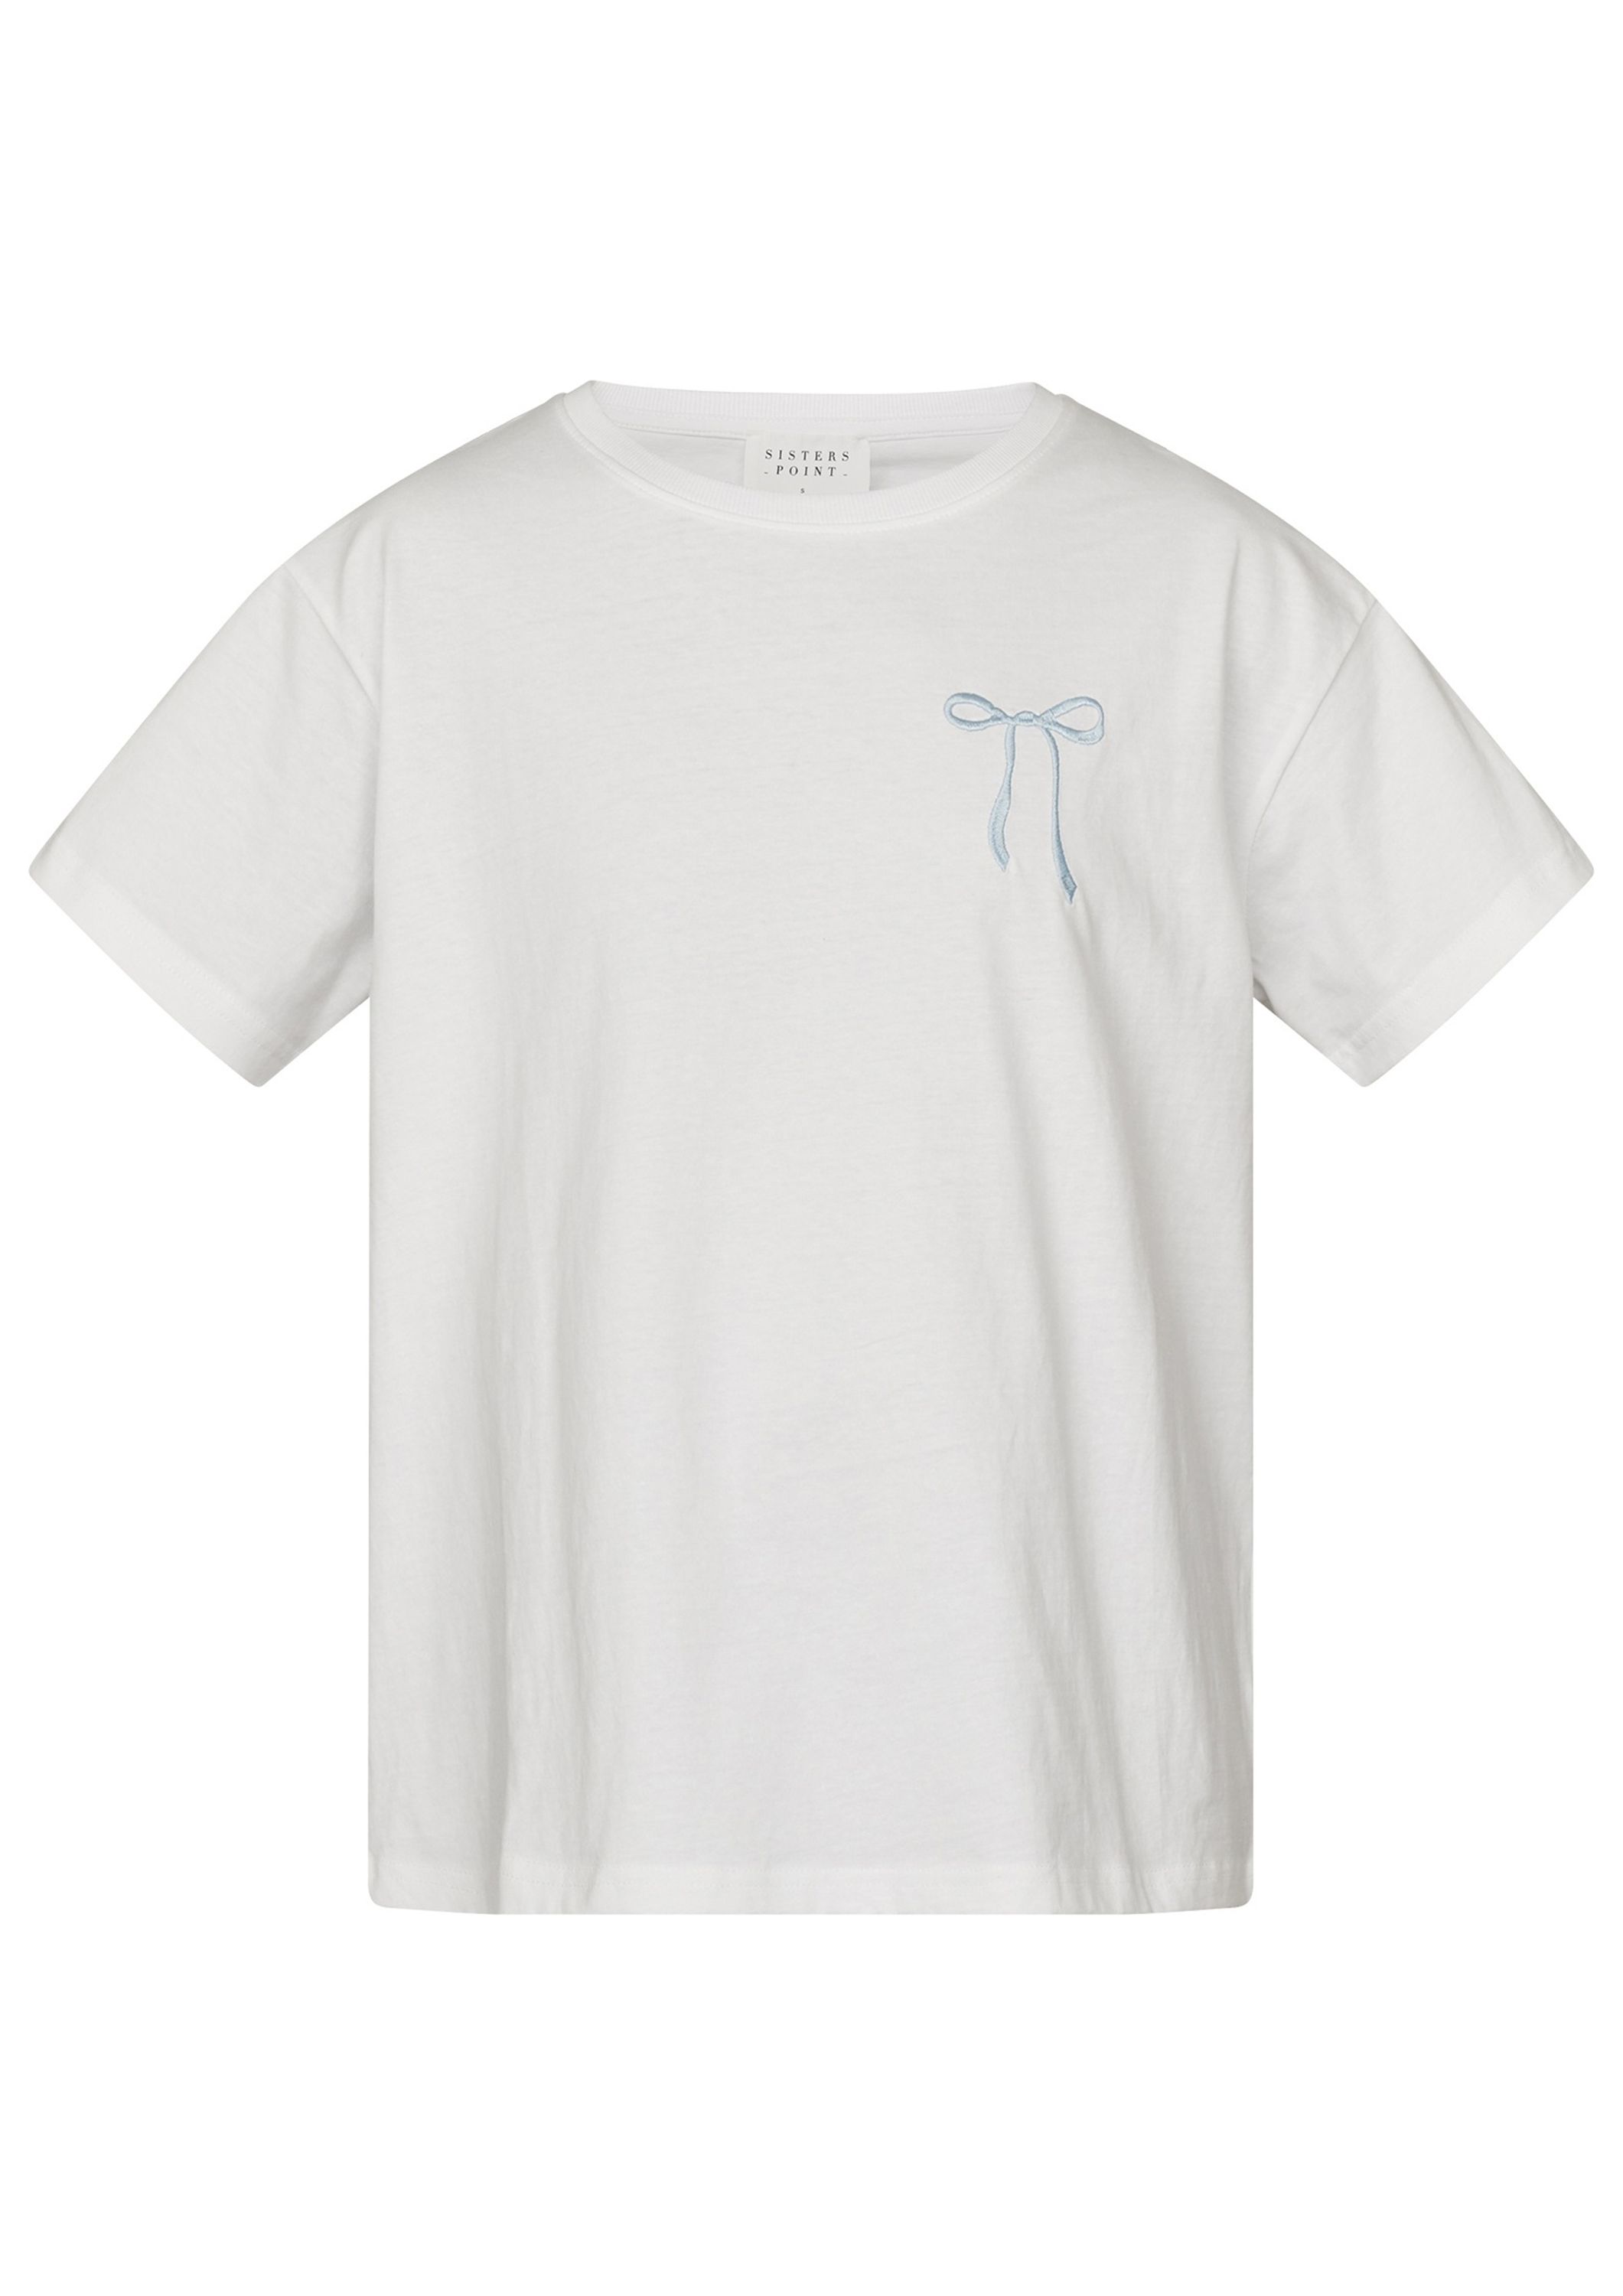 SISTERS POINT SHIRT